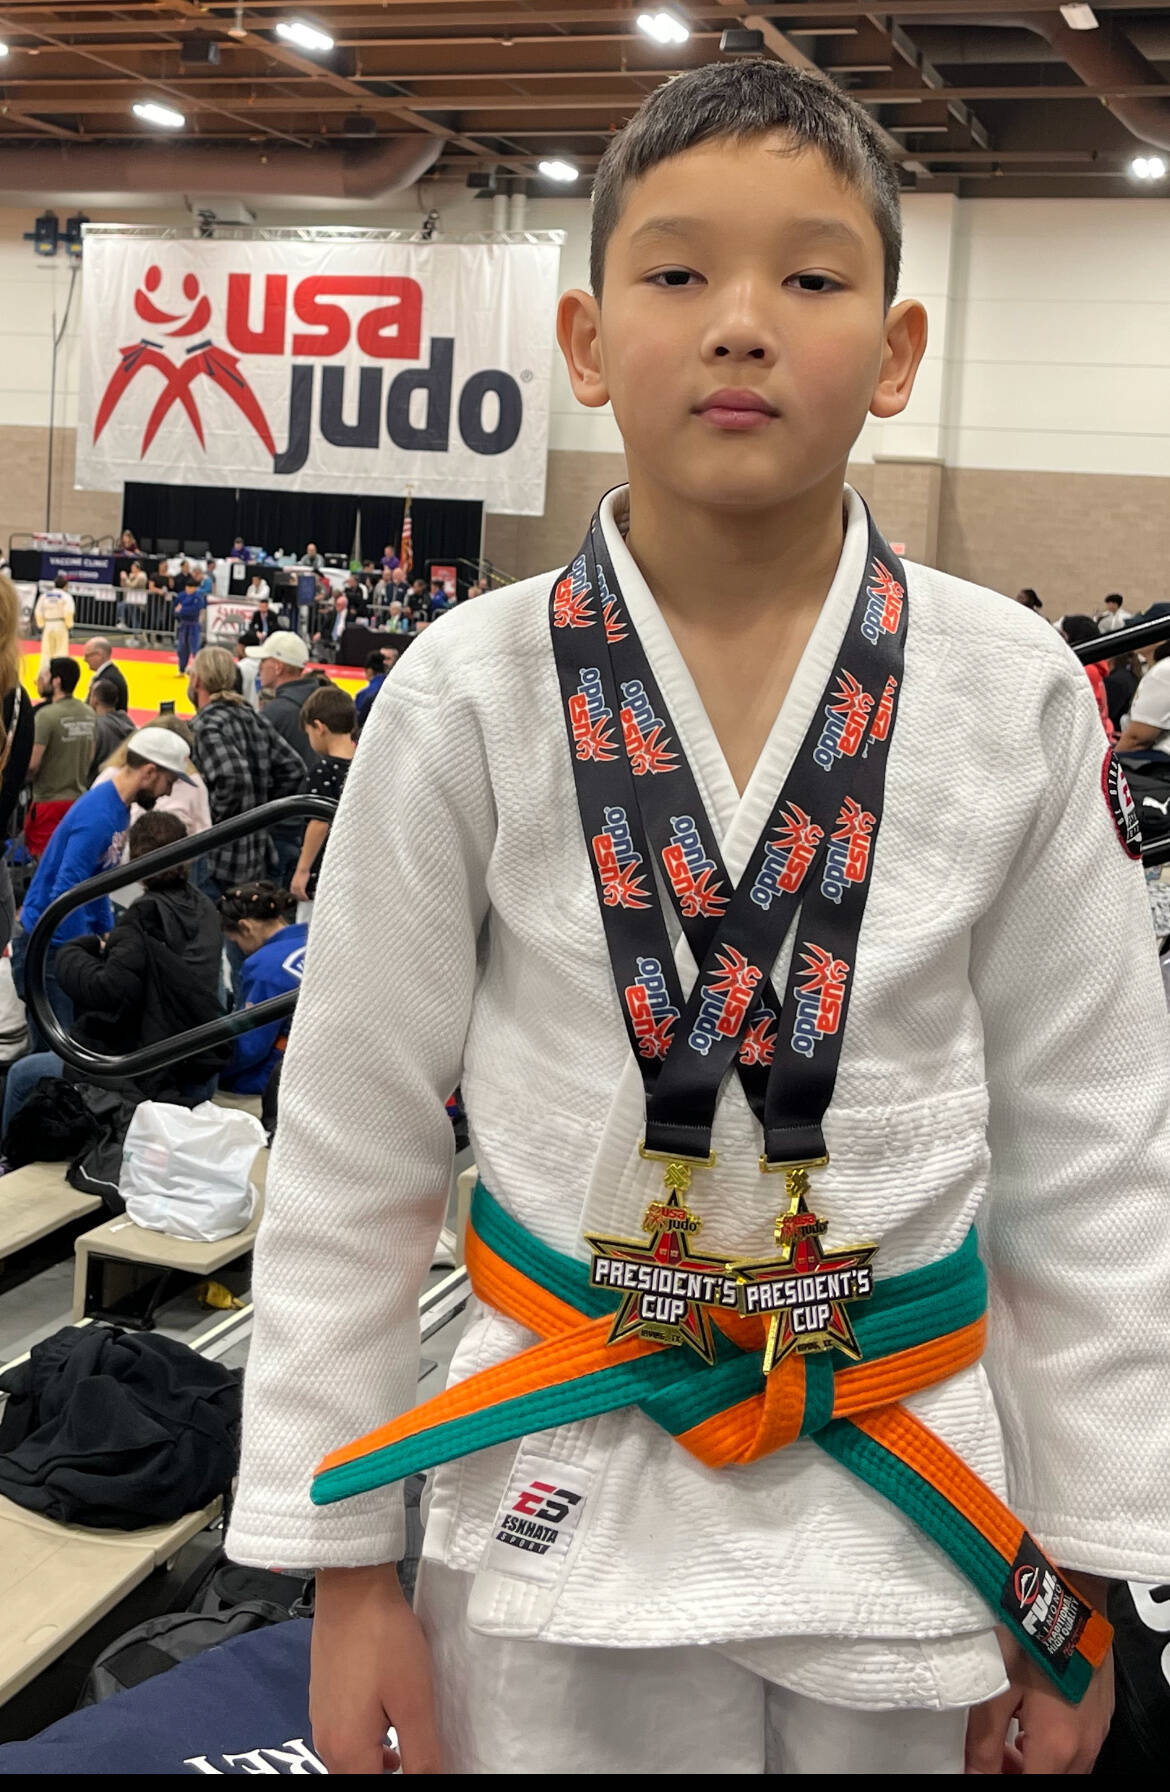 Northwood Elementary School student Mikhail Zulaev unleashed his technique, speed and strength to snag a pair of gold medals at the recent President’s Cup Judo Tournament in Irving, Texas. He notched top honors in both the Bantam 4 male /under 30kg/ and Bantam 4 male /under 34kg/ weight categories. “Zulaev’s success at the President’s Cup serves as an inspiration to aspiring judokas of all ages. His unwavering dedication to training and his ability to perform under pressure are qualities that embody the true spirit of judo,” reads a press release. Courtesy photo